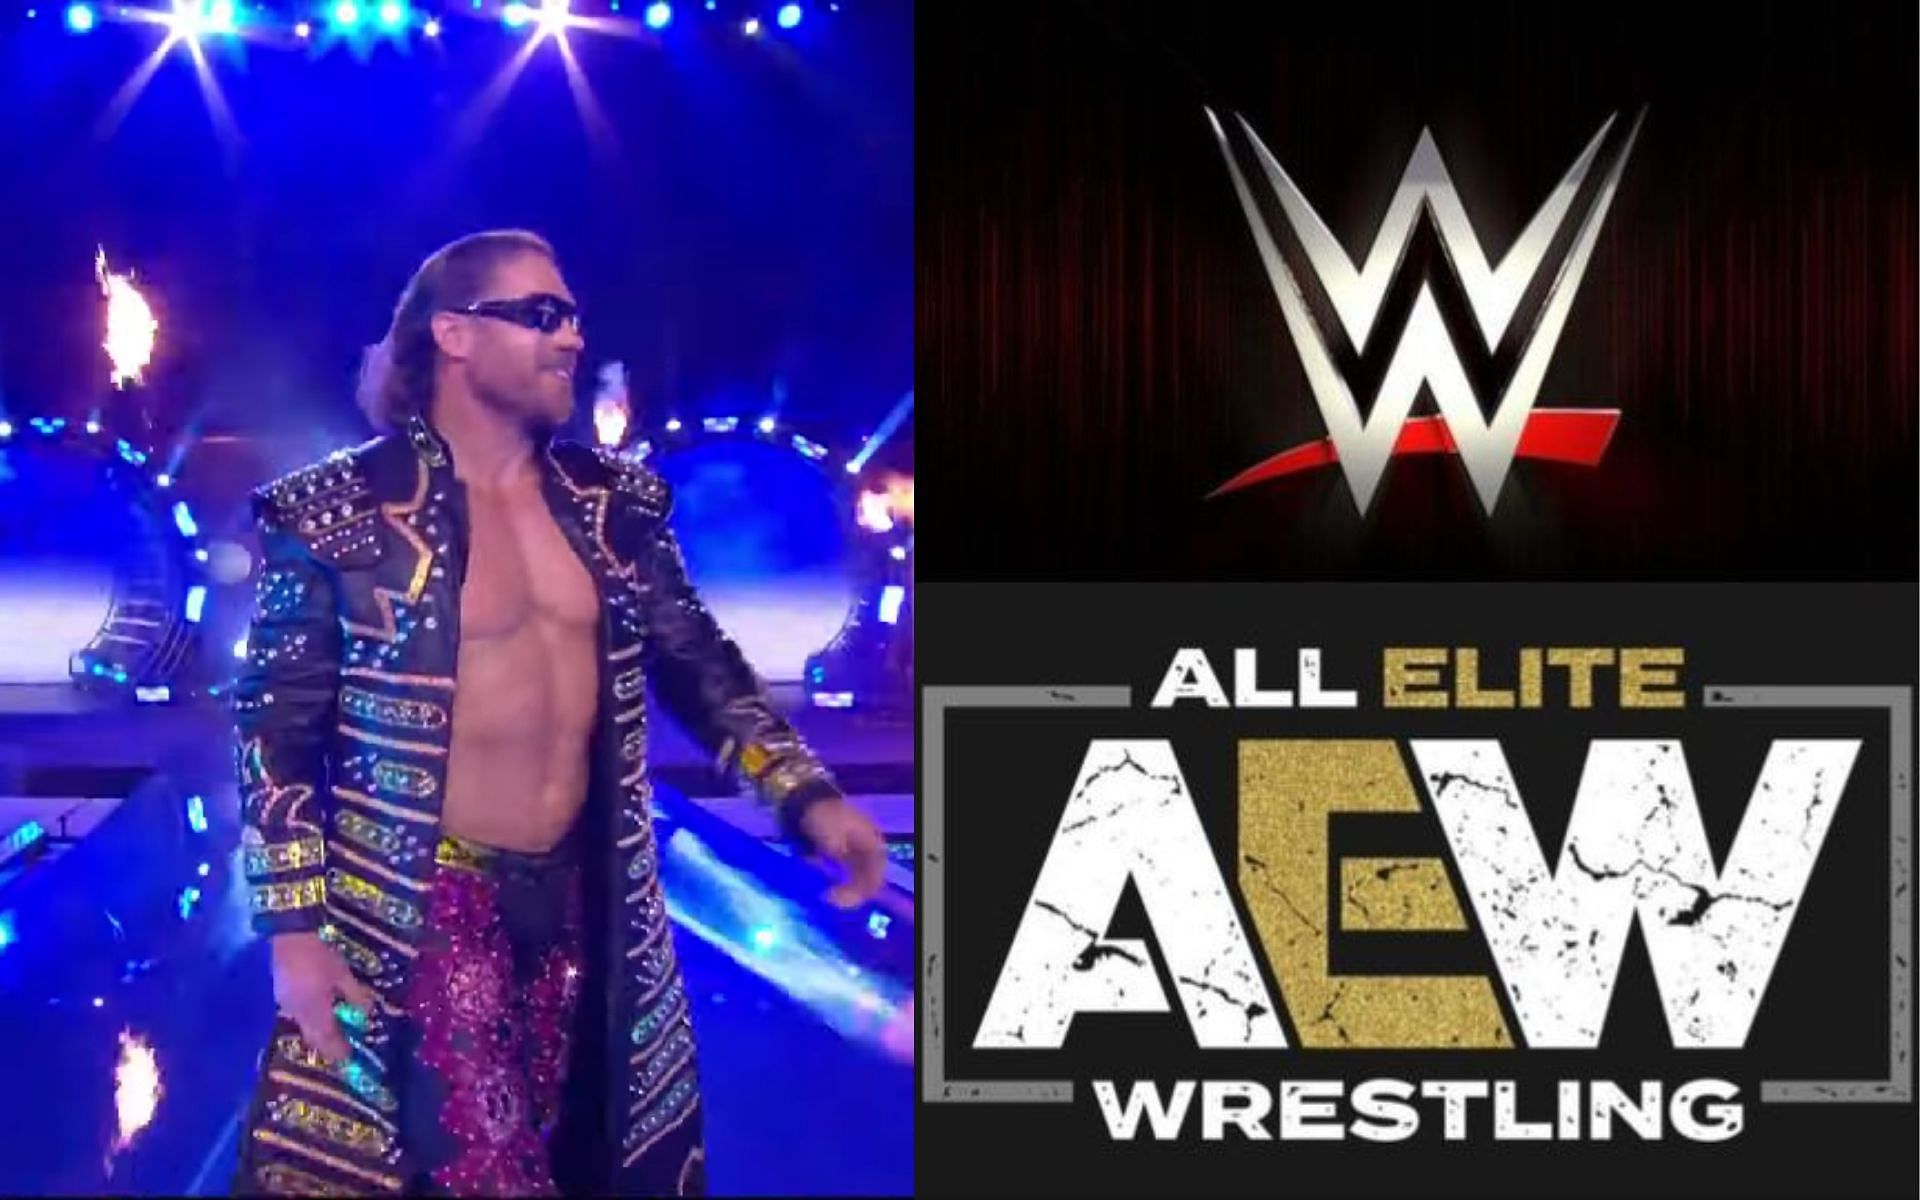 Johnny Elite currently sports a 1-2 record in AEW